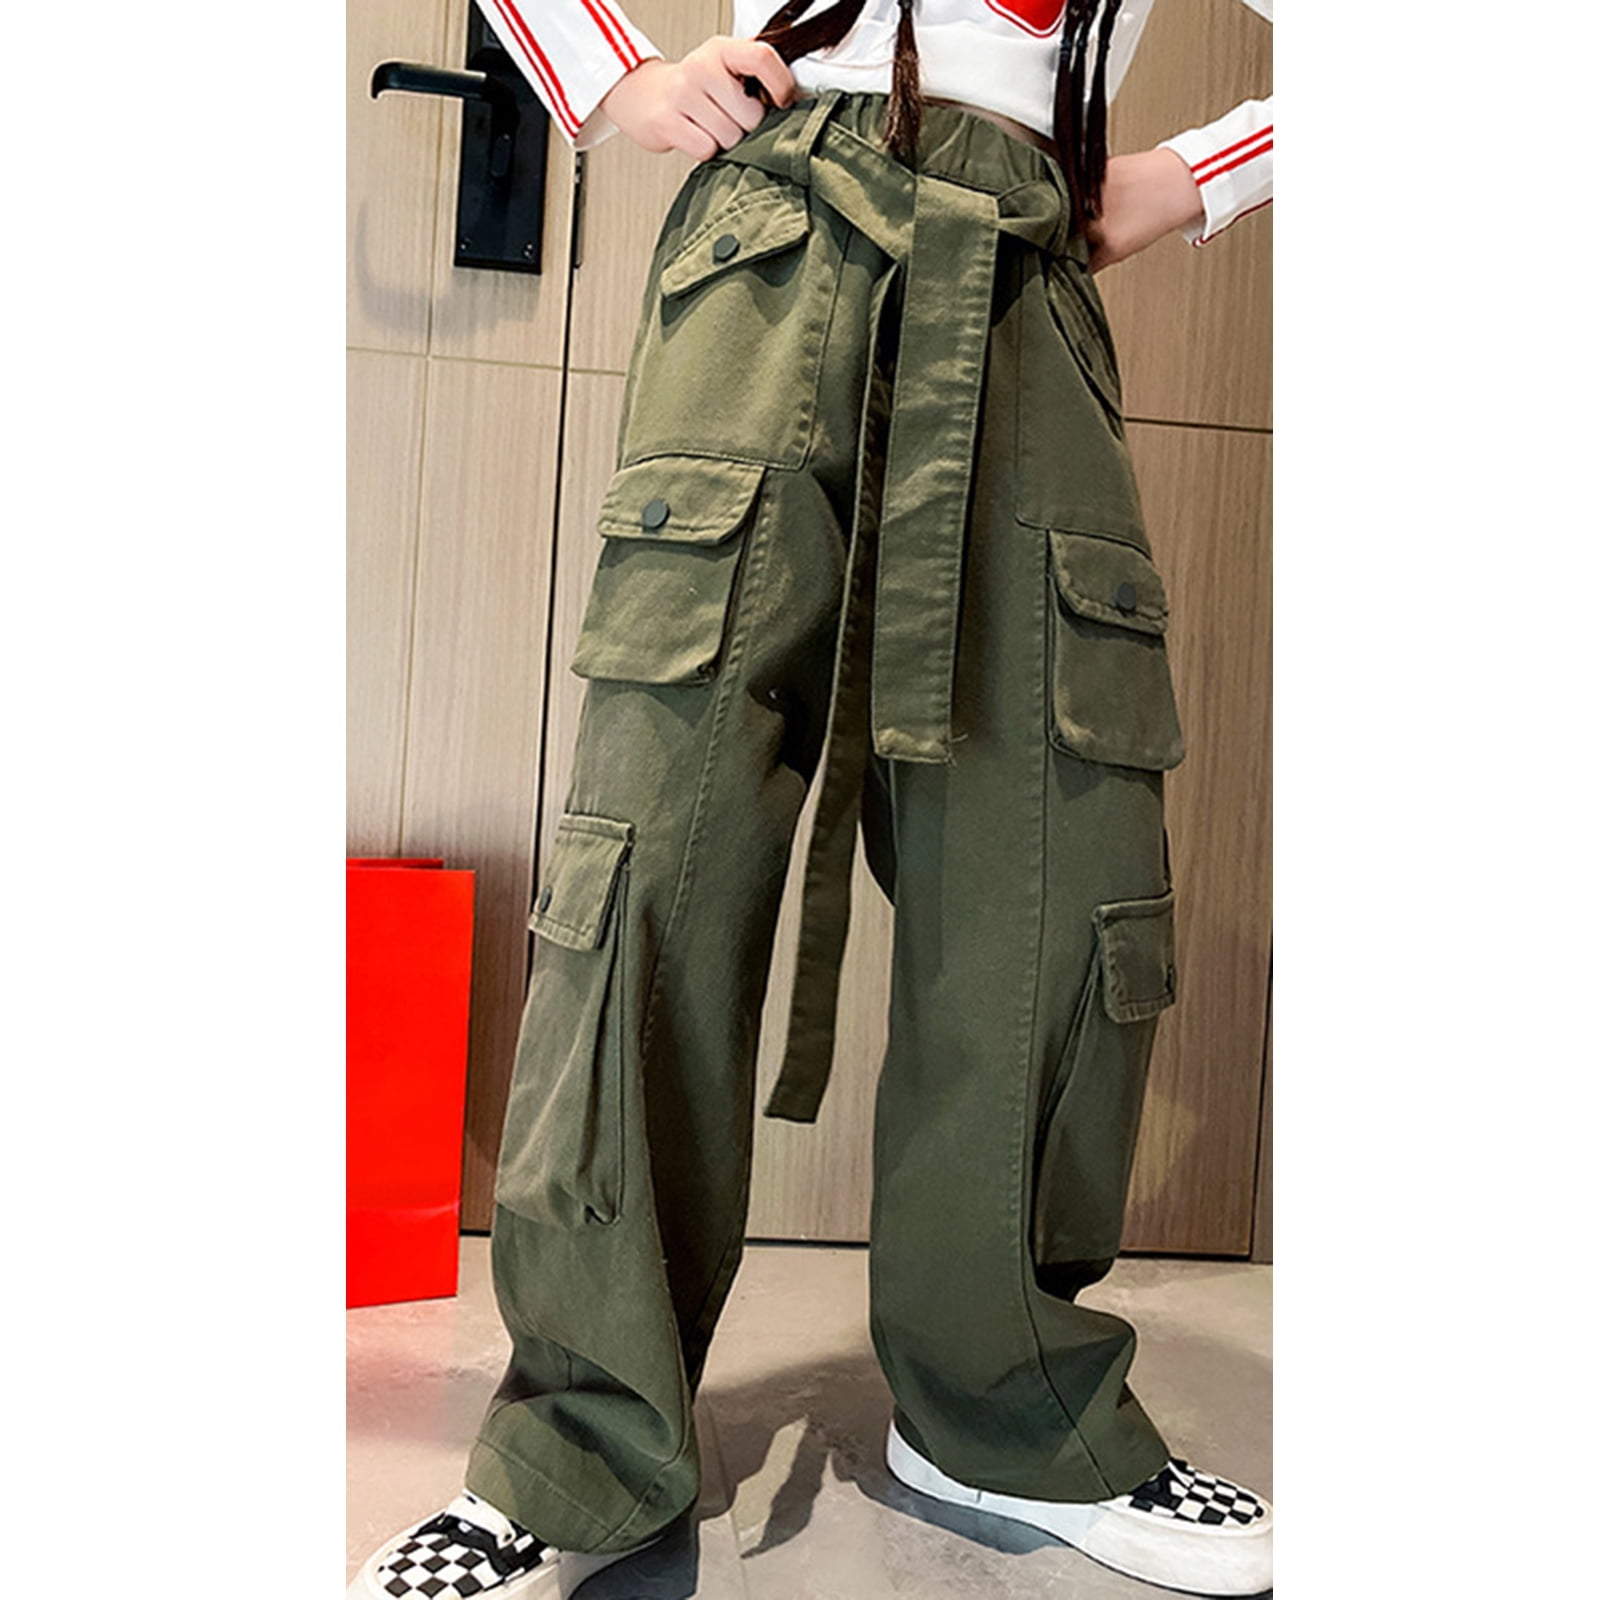 Fashion Women Military Camo Cargo Pants Hip Hop Dance Camouflage Trousers  Femme Jean Trousers Street Wear  China Pants and Casual Pants price   MadeinChinacom